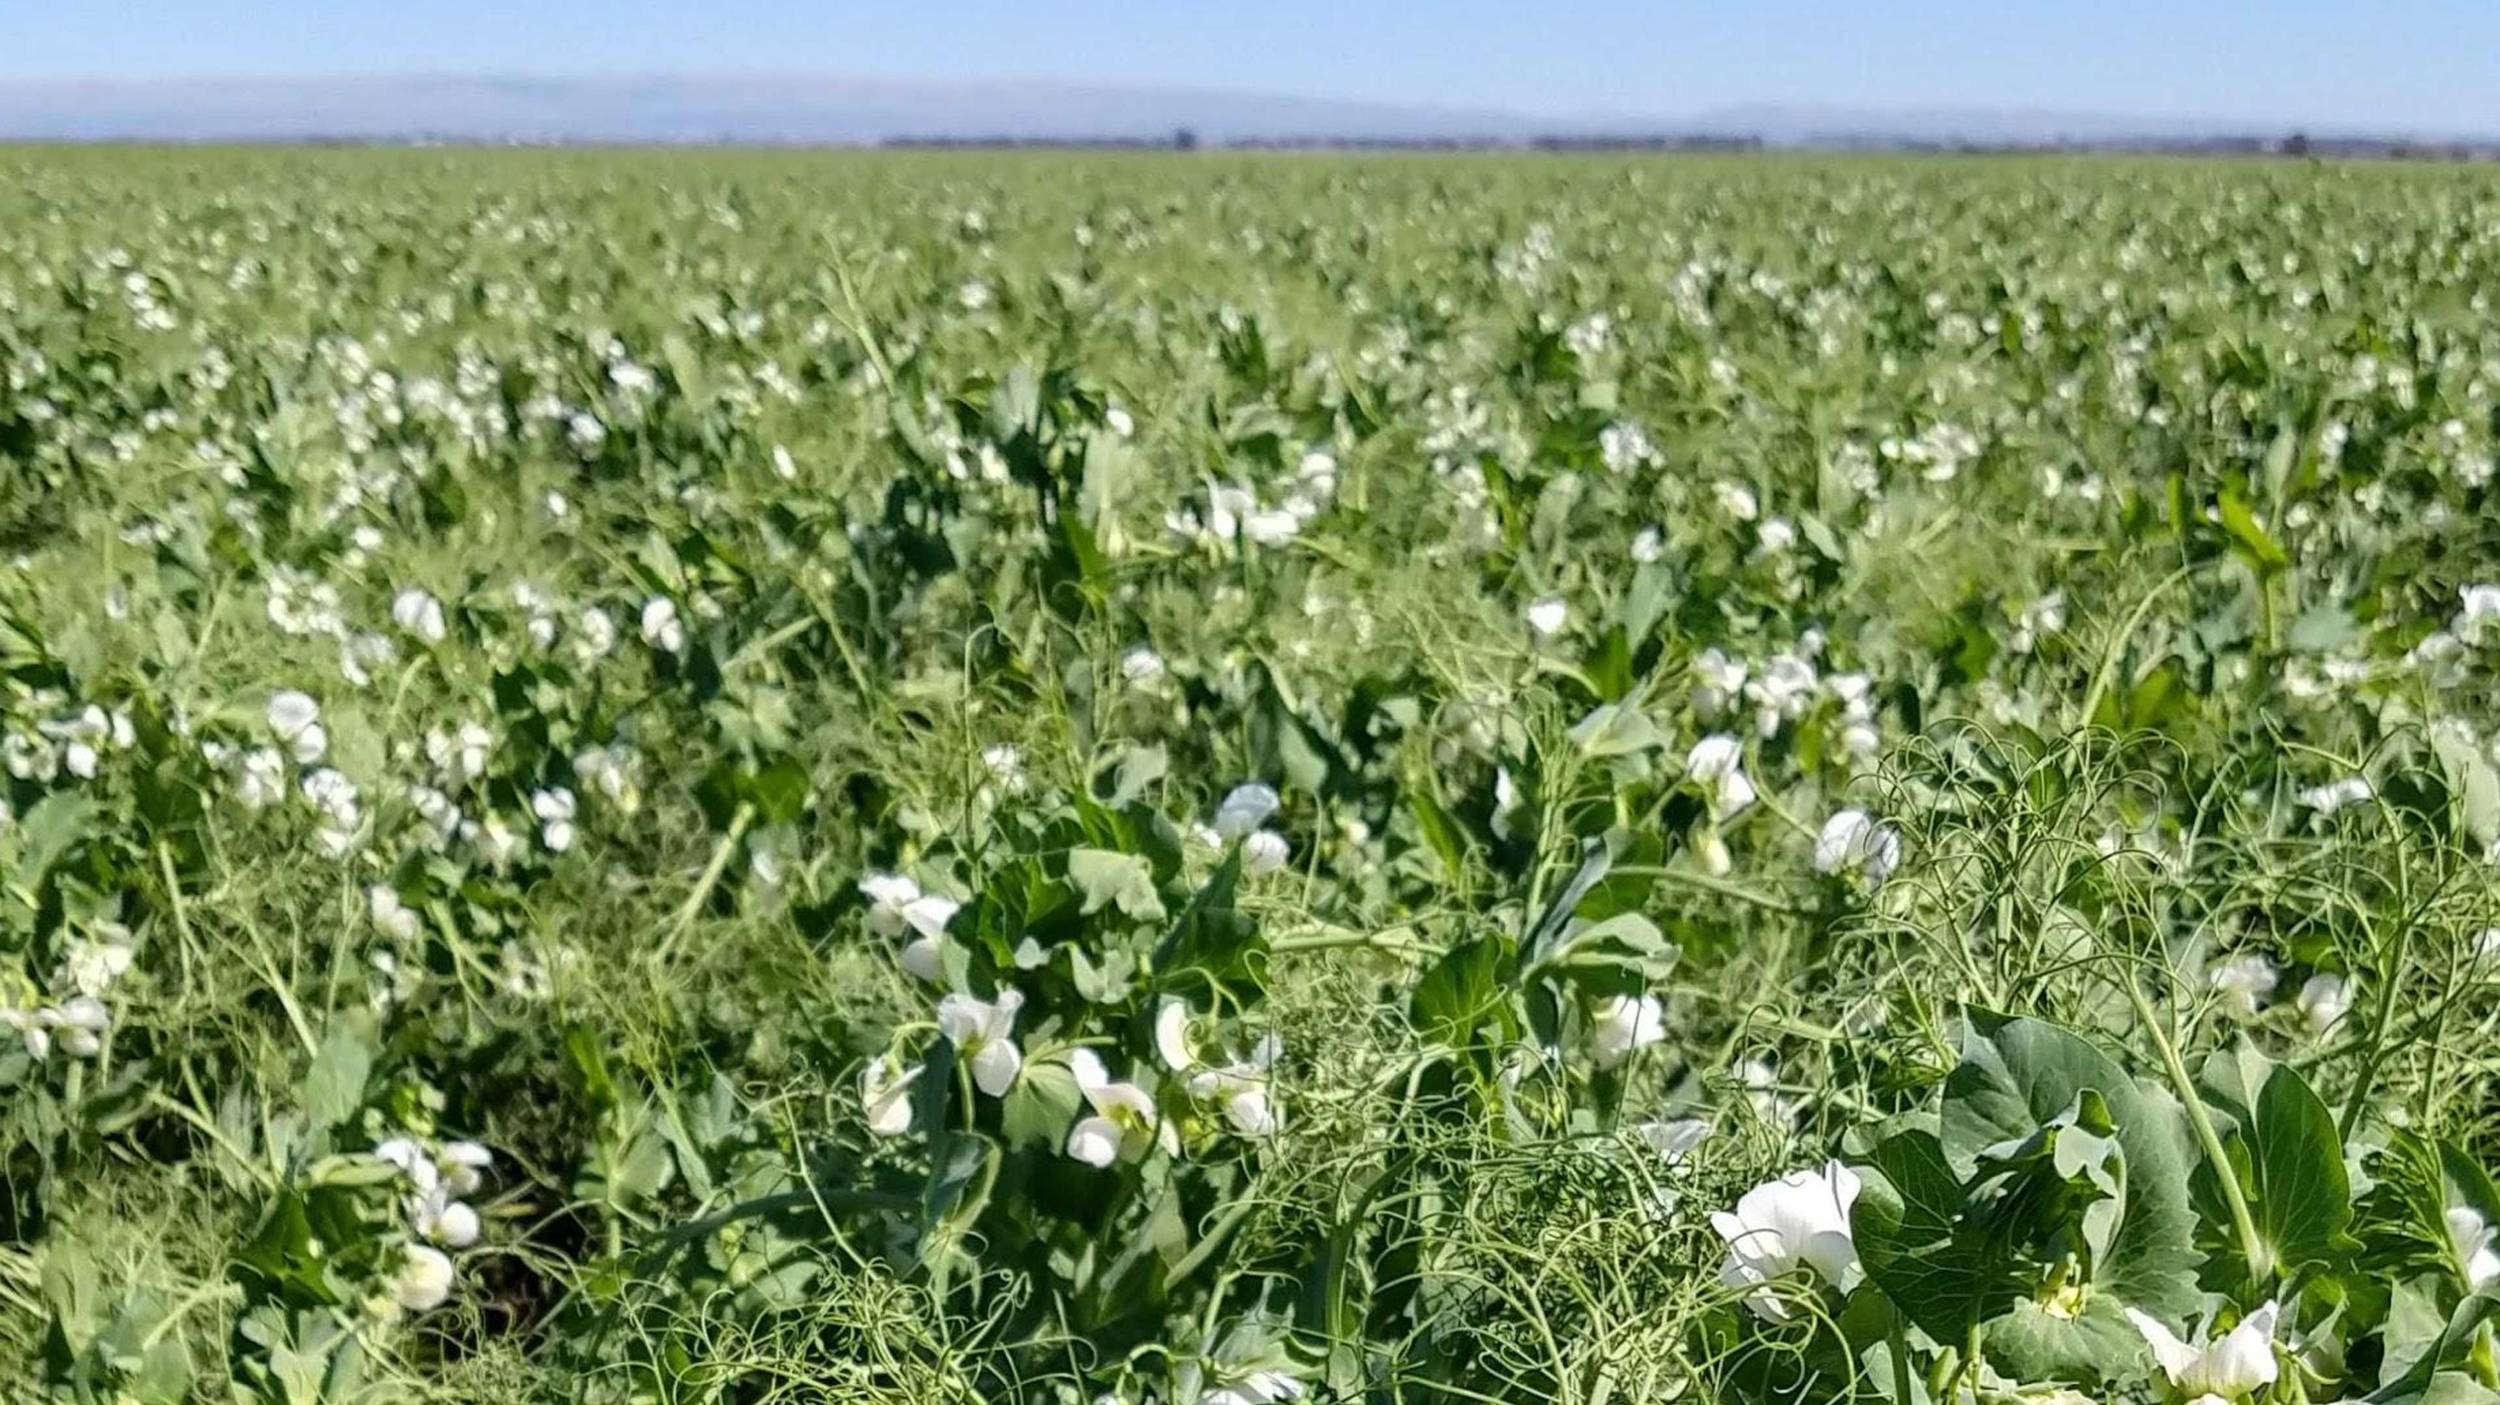 Argentina has perfect conditions for growing peas.